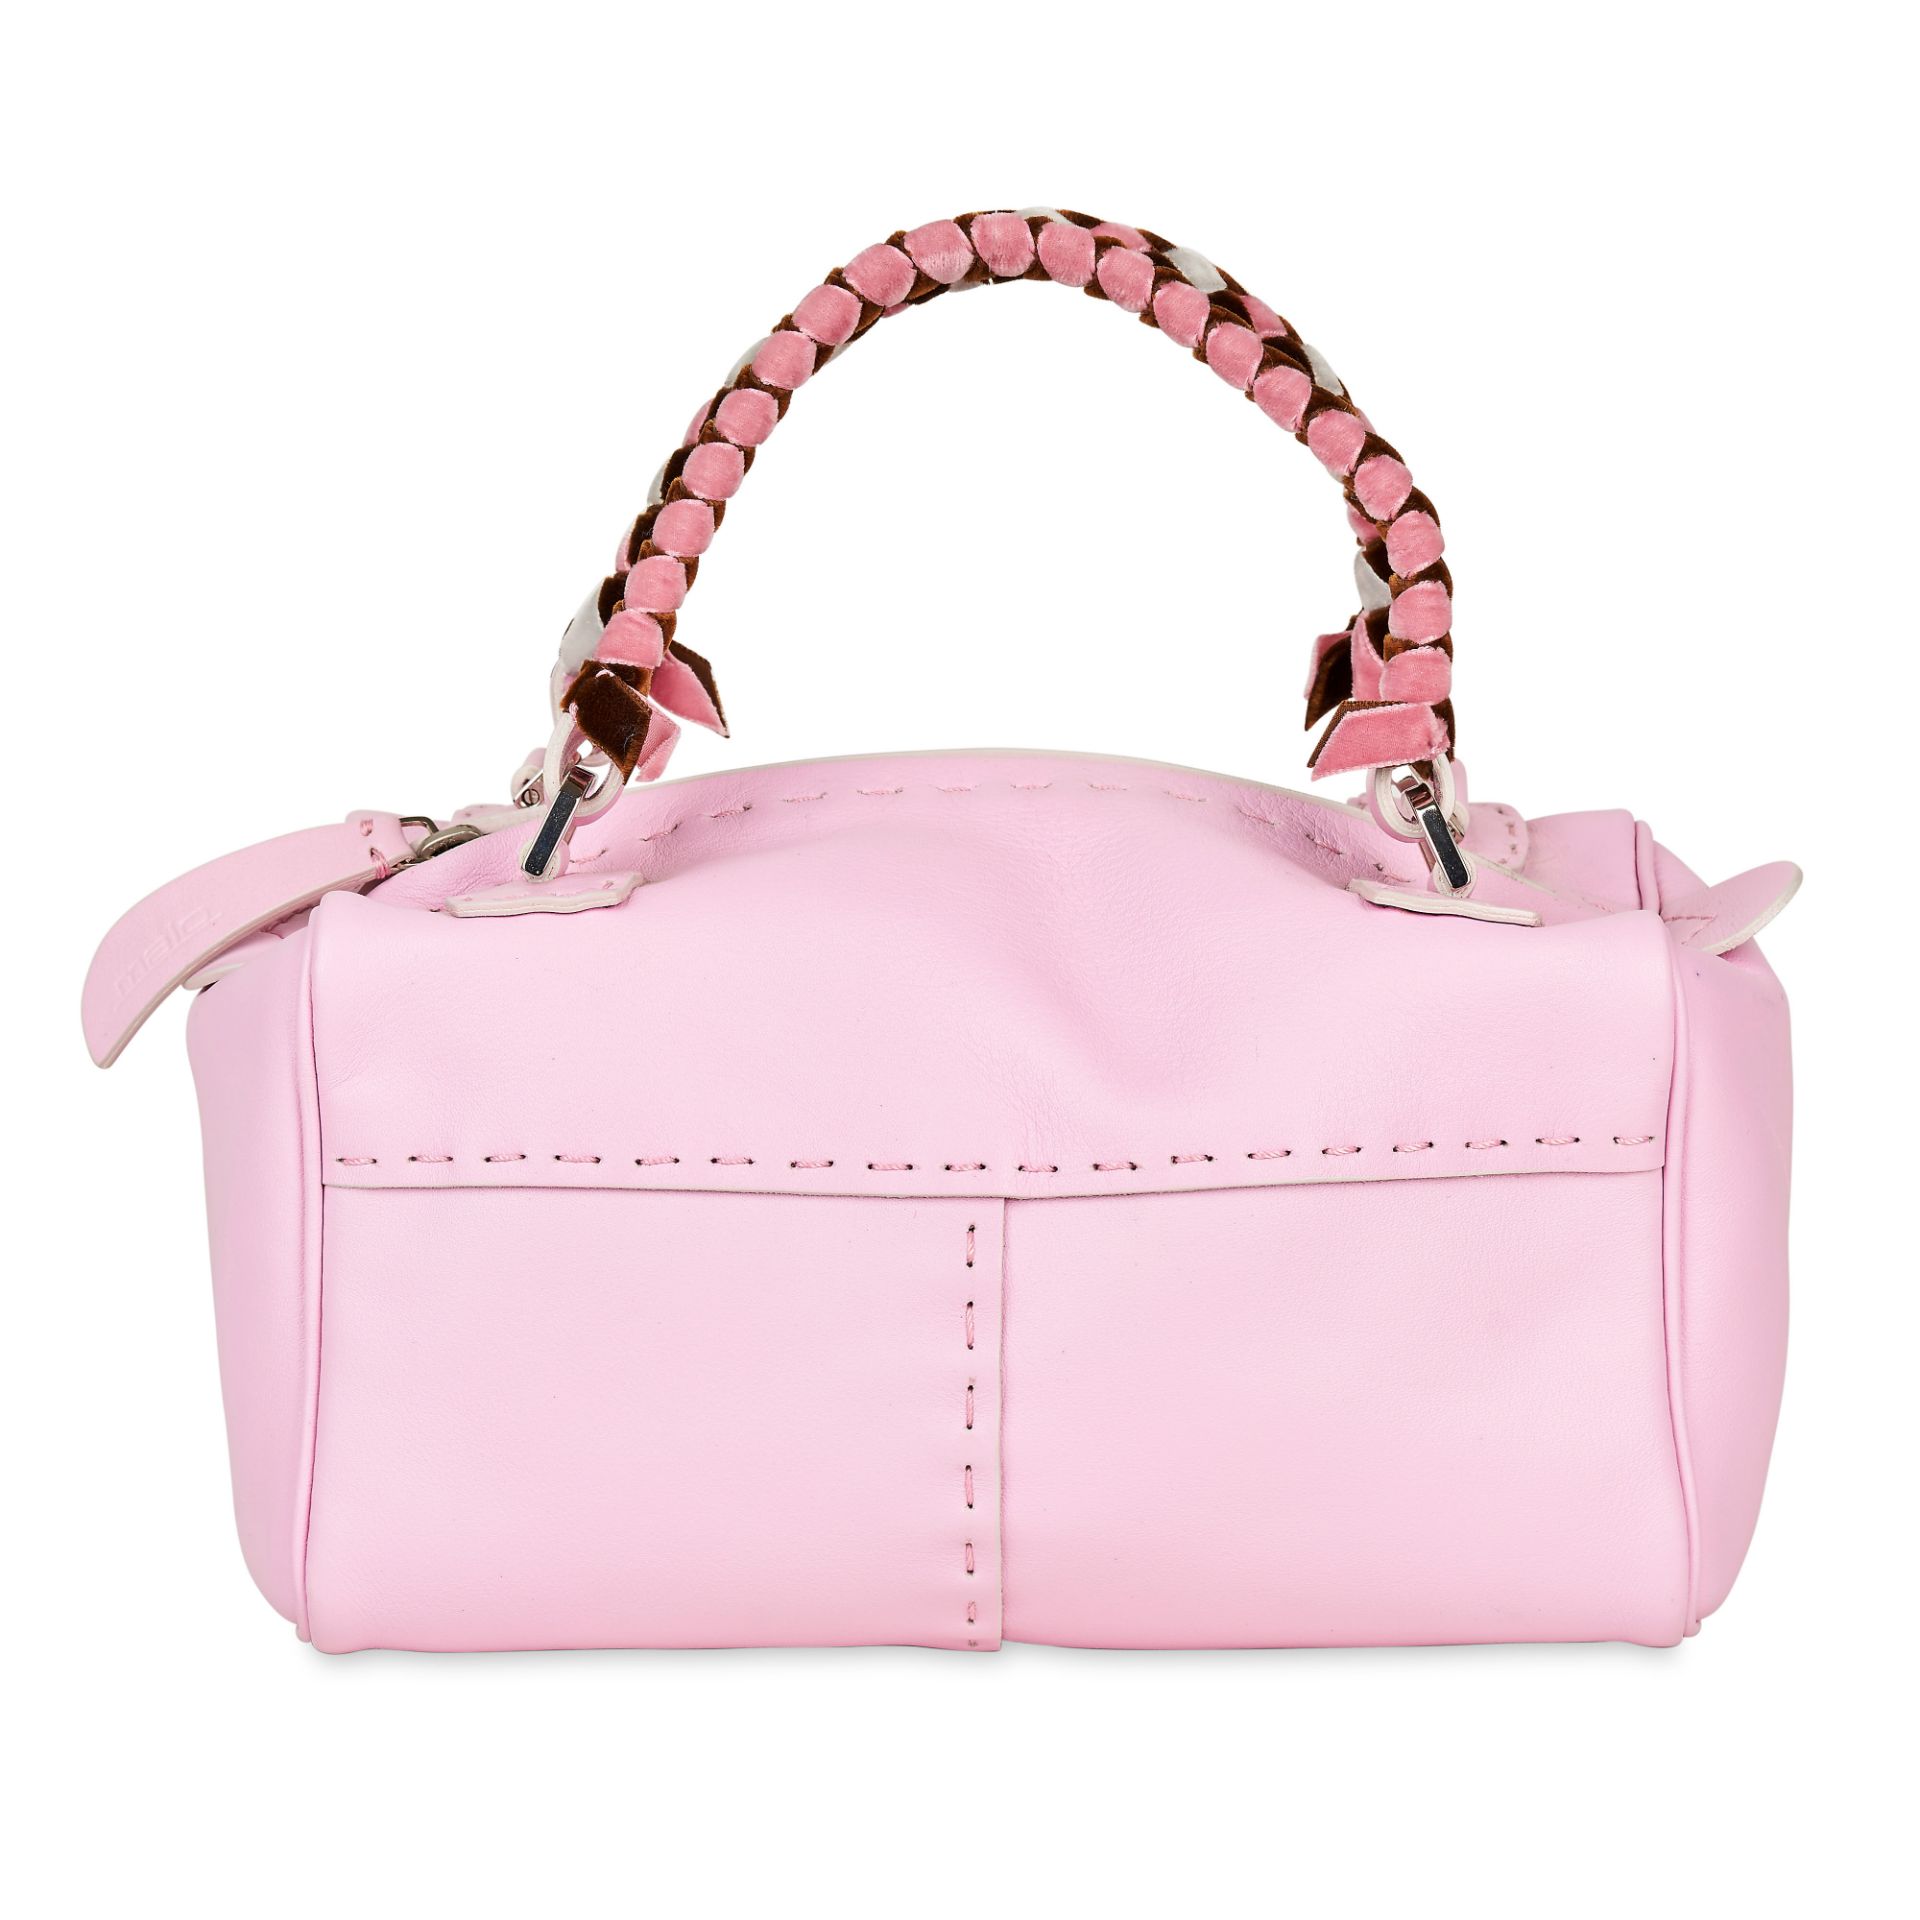 NO RESERVE MALO PINK LEATHER BAG - Image 2 of 3